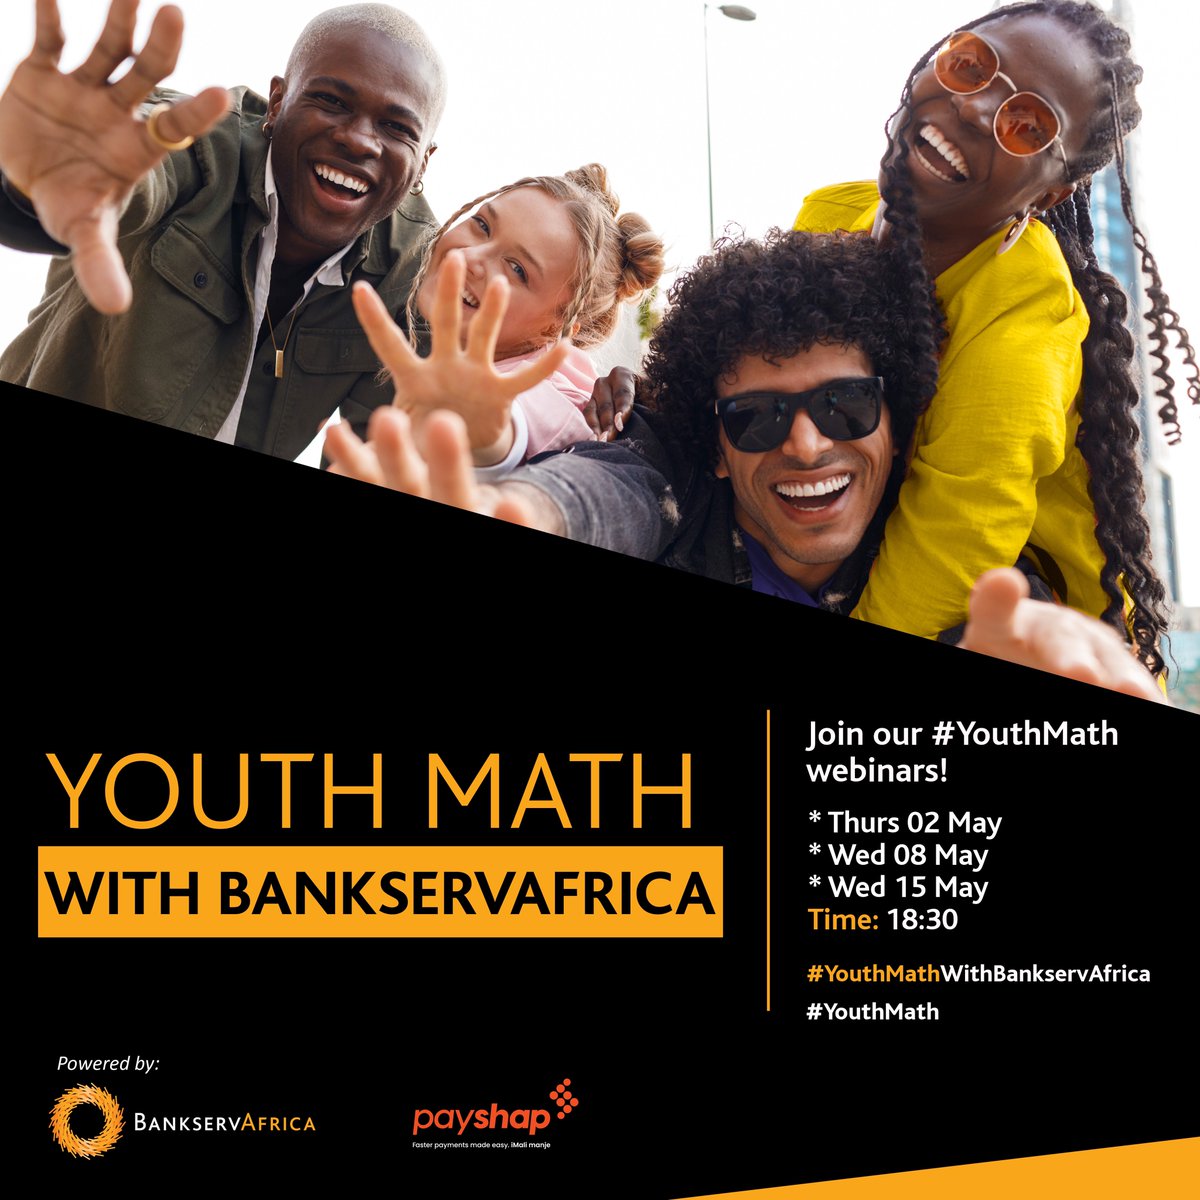 We’ve heard your #YouthMath loud and clear! Now, it's time to level up our financial game! Join our webinars where we'll tackle each of your money dilemmas head-on. Plus, stand a chance to win some vouchers! 🤩 Register now! bit.ly/3DiEiR0 #YouthMathWithBankservAfrica